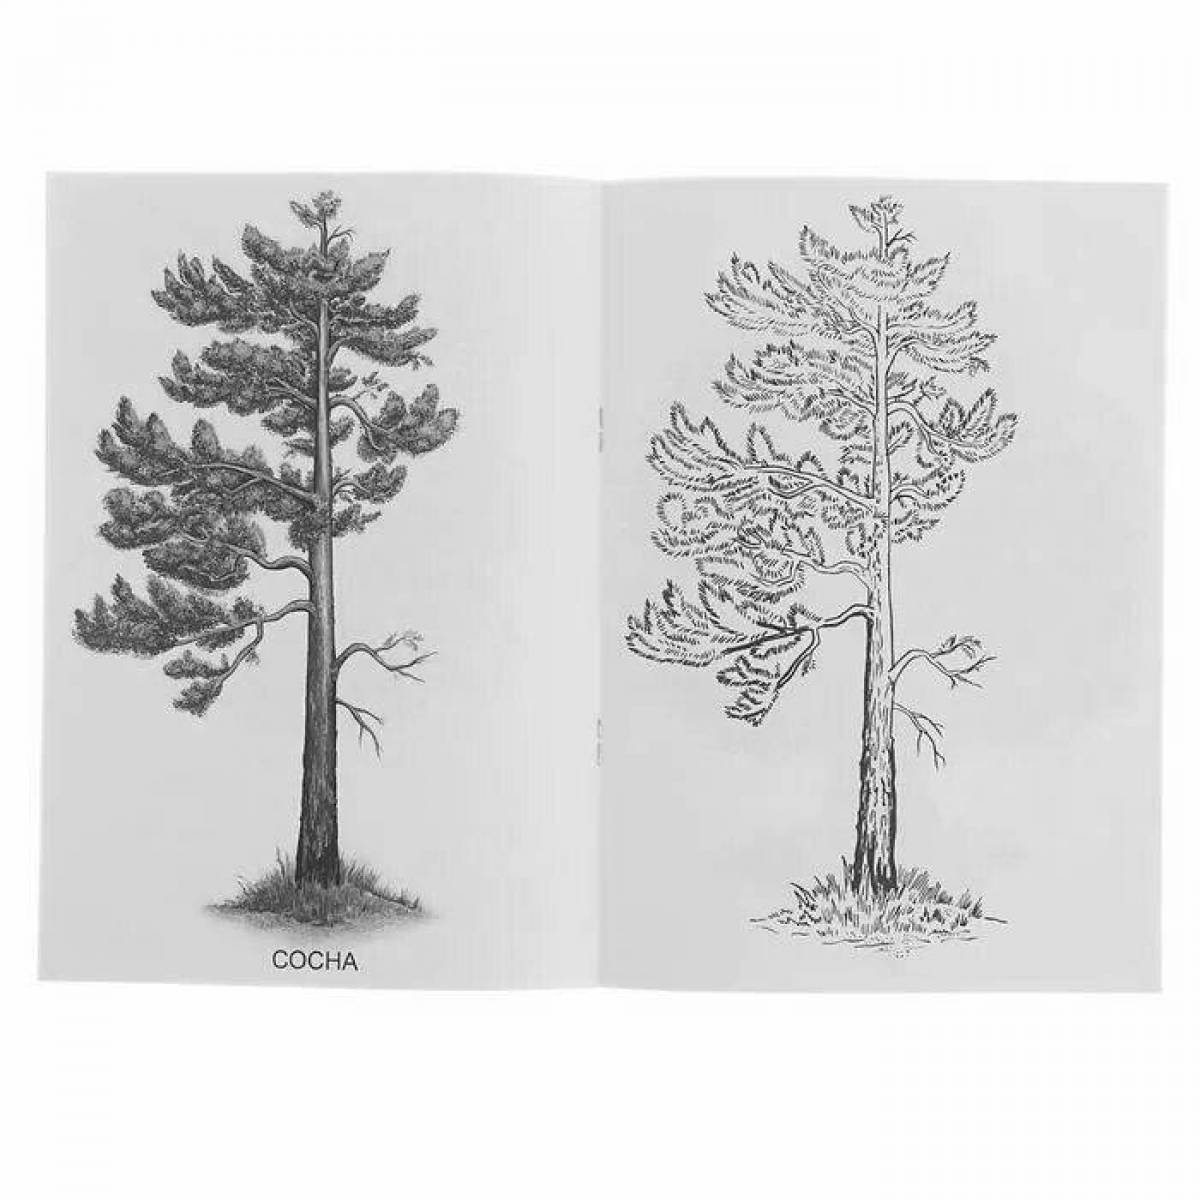 Big pine coloring book for kids